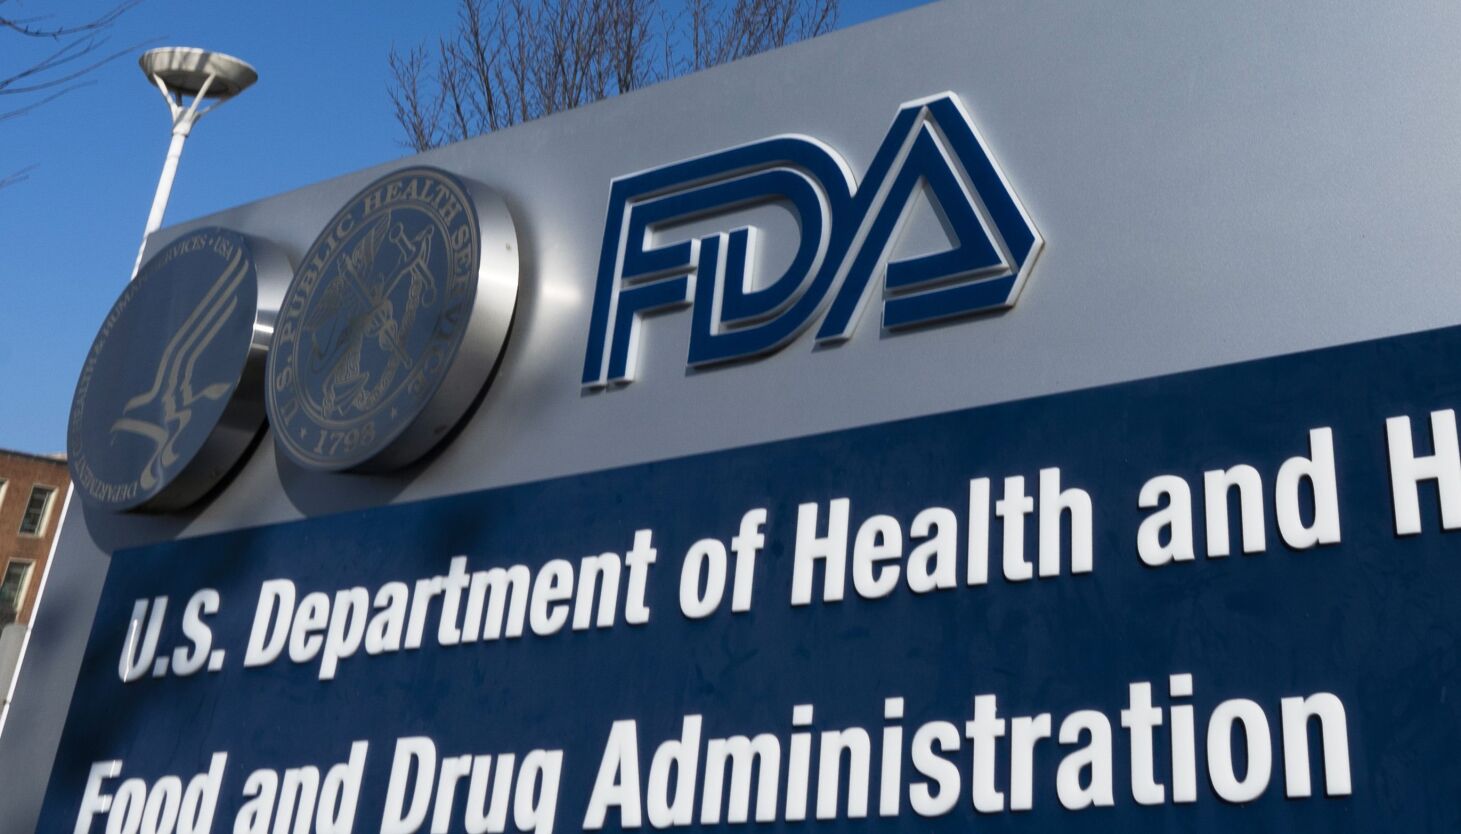 Medicare to cover Alzheimer’s drugs, if they get full FDA approval